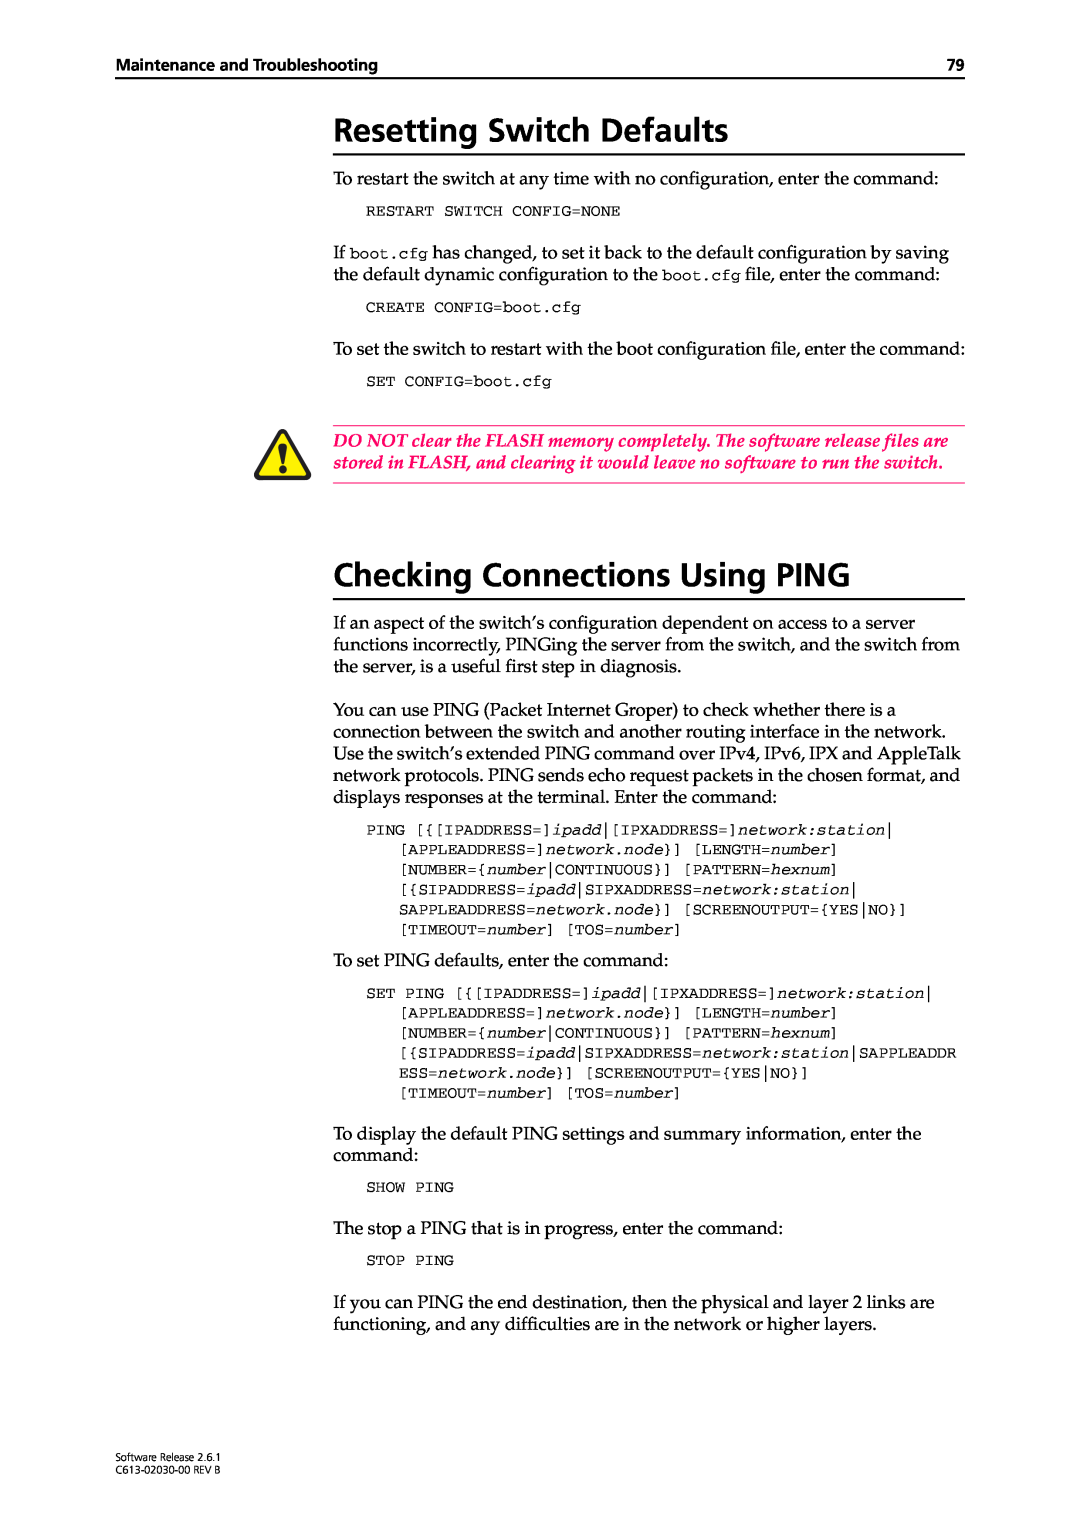 Allied Telesis at-8700xl series switch manual Resetting Switch Defaults, Checking Connections Using PING 